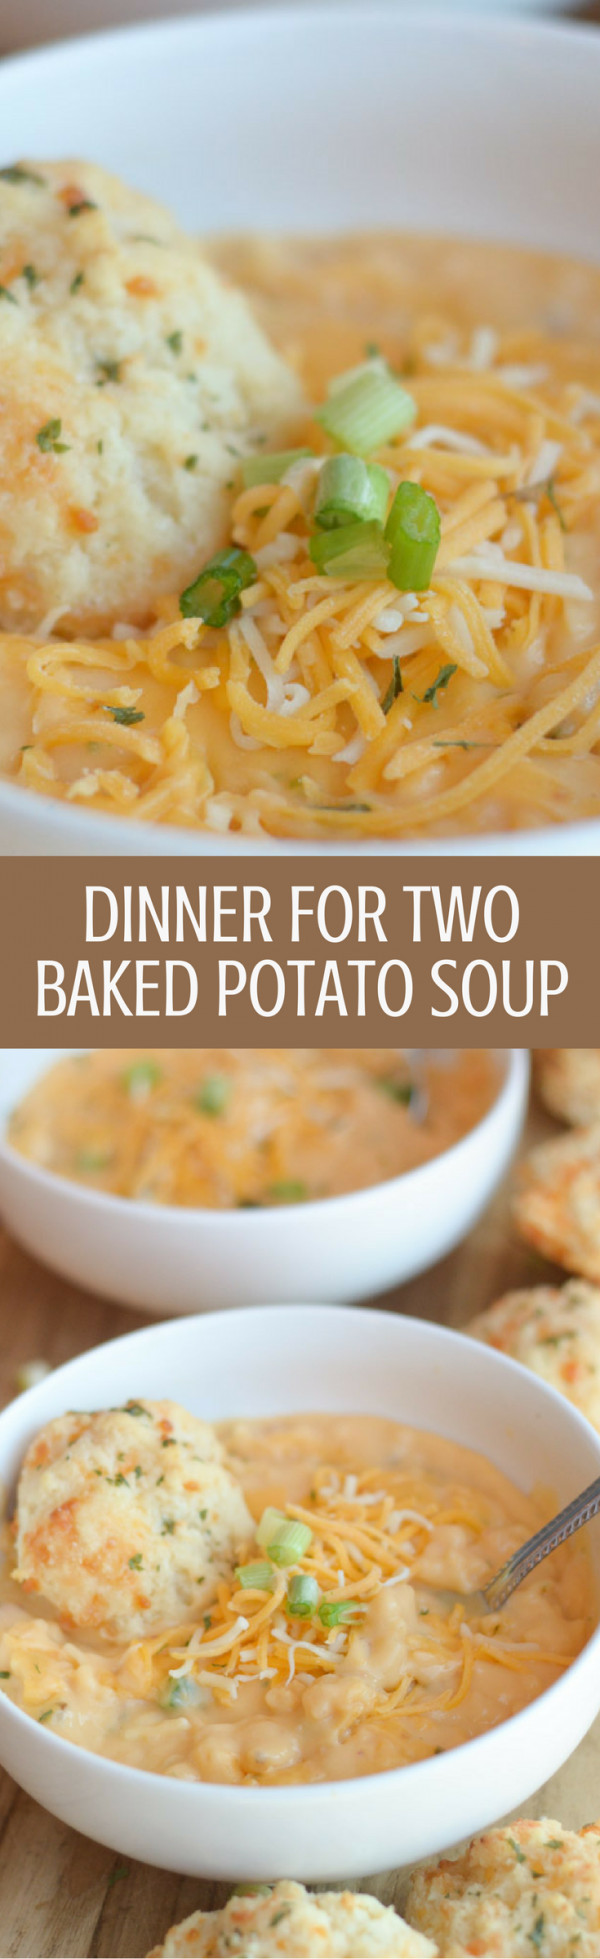 Potato Soup For Two
 Dinner for Two with Baked Potato Soup Mommy Hates Cooking